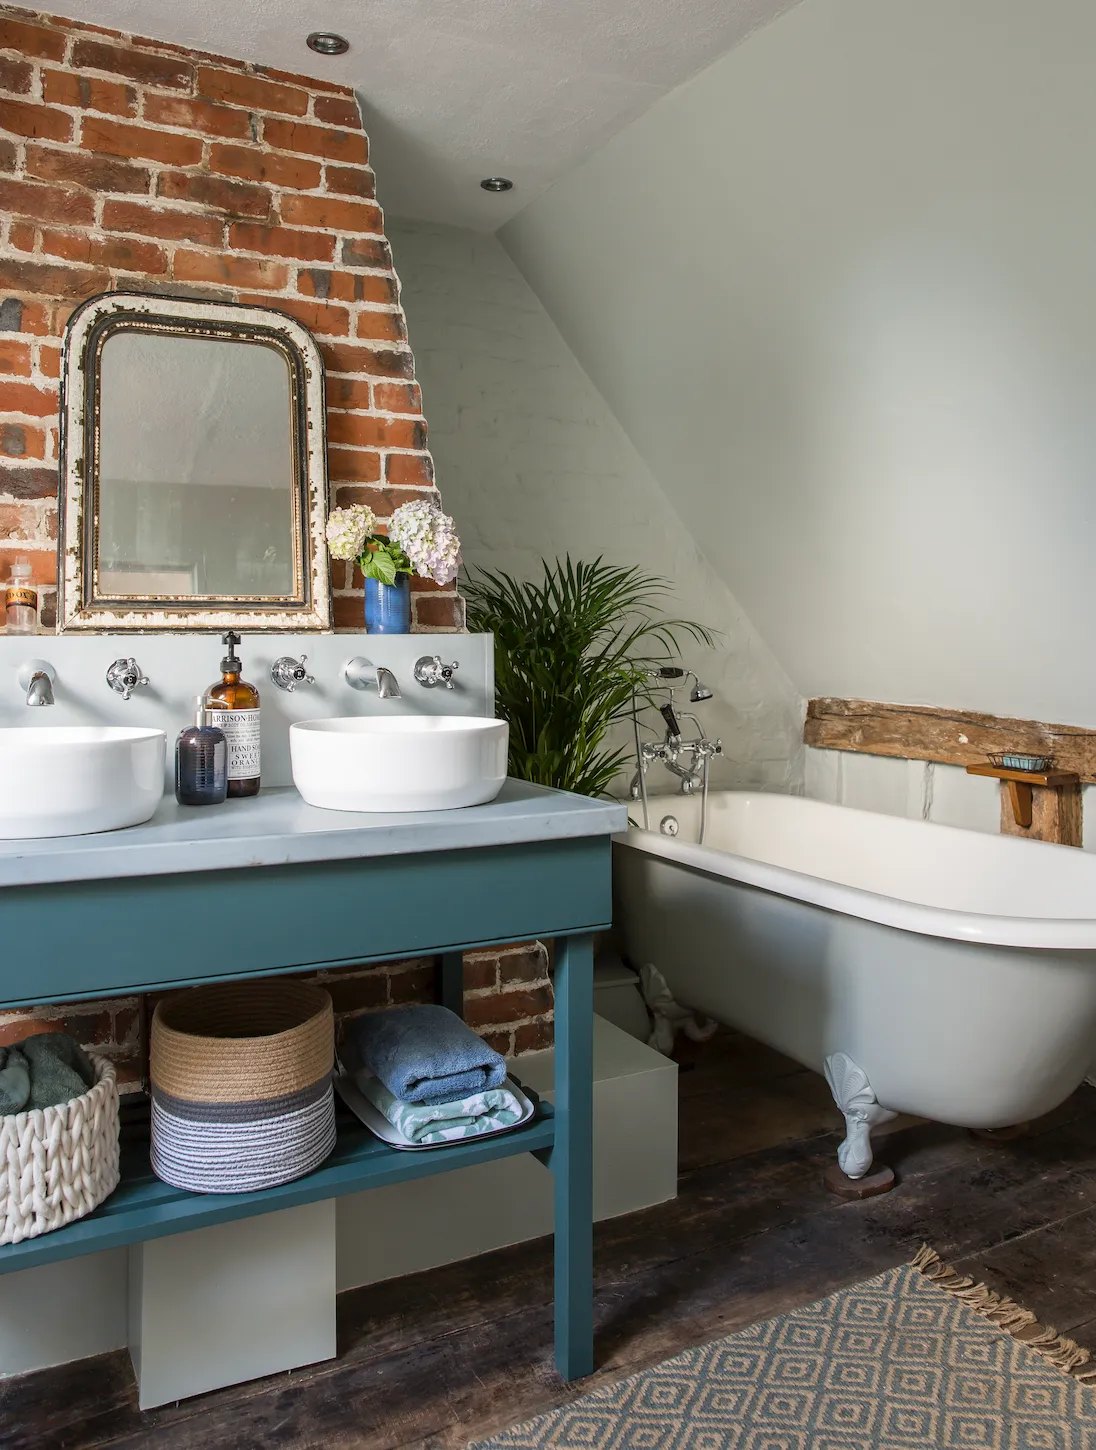 Bathroom makeover: 'Recycling allowed us to stay on budget'